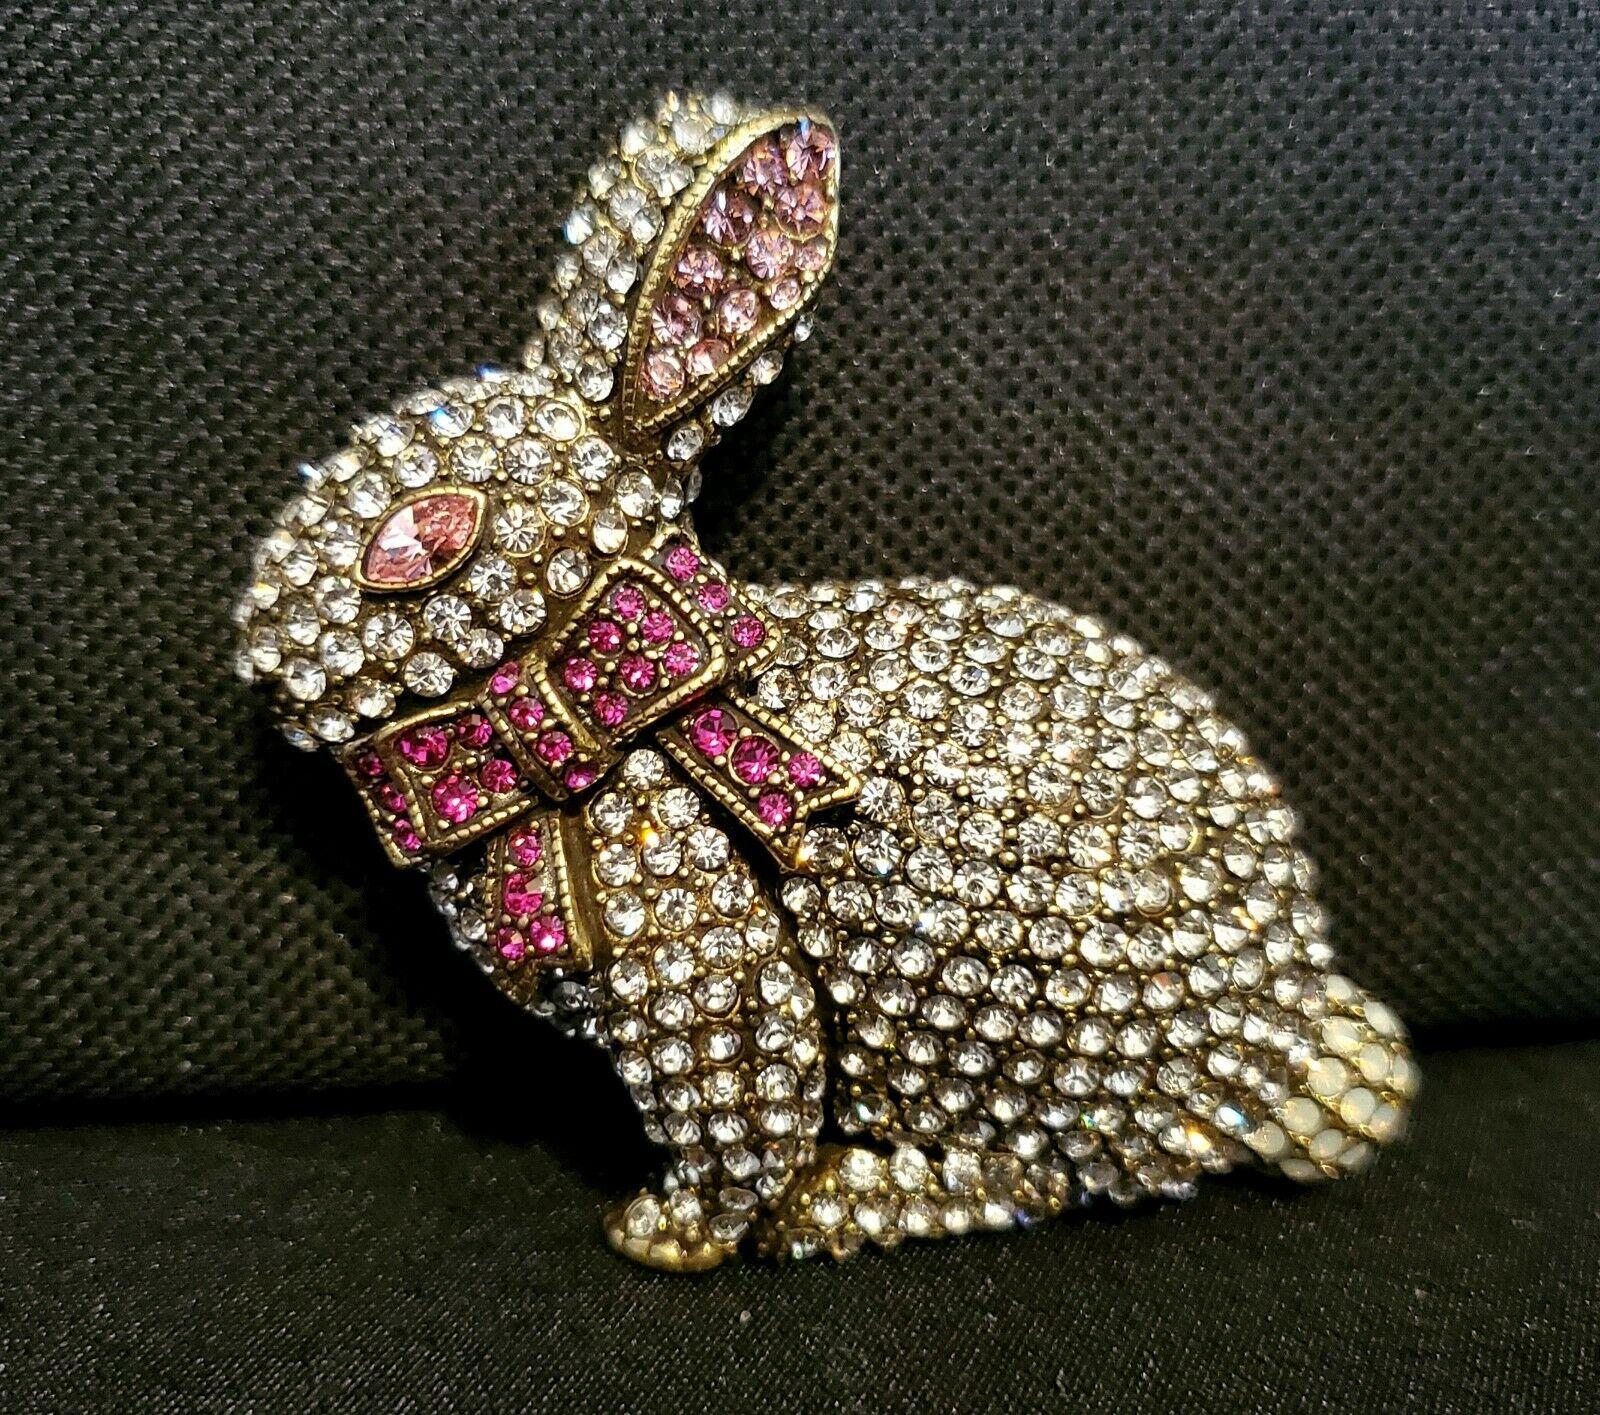 Hippity Hopitty Rabbit (With Pink Bow) Pin. Heidi Daus has designed beautiful bunny pins for years. Her Hippity Hopitty rabbit pin is a perfect example of her many talents. She even added a pretty pink bow to make it even more special.

Crystal